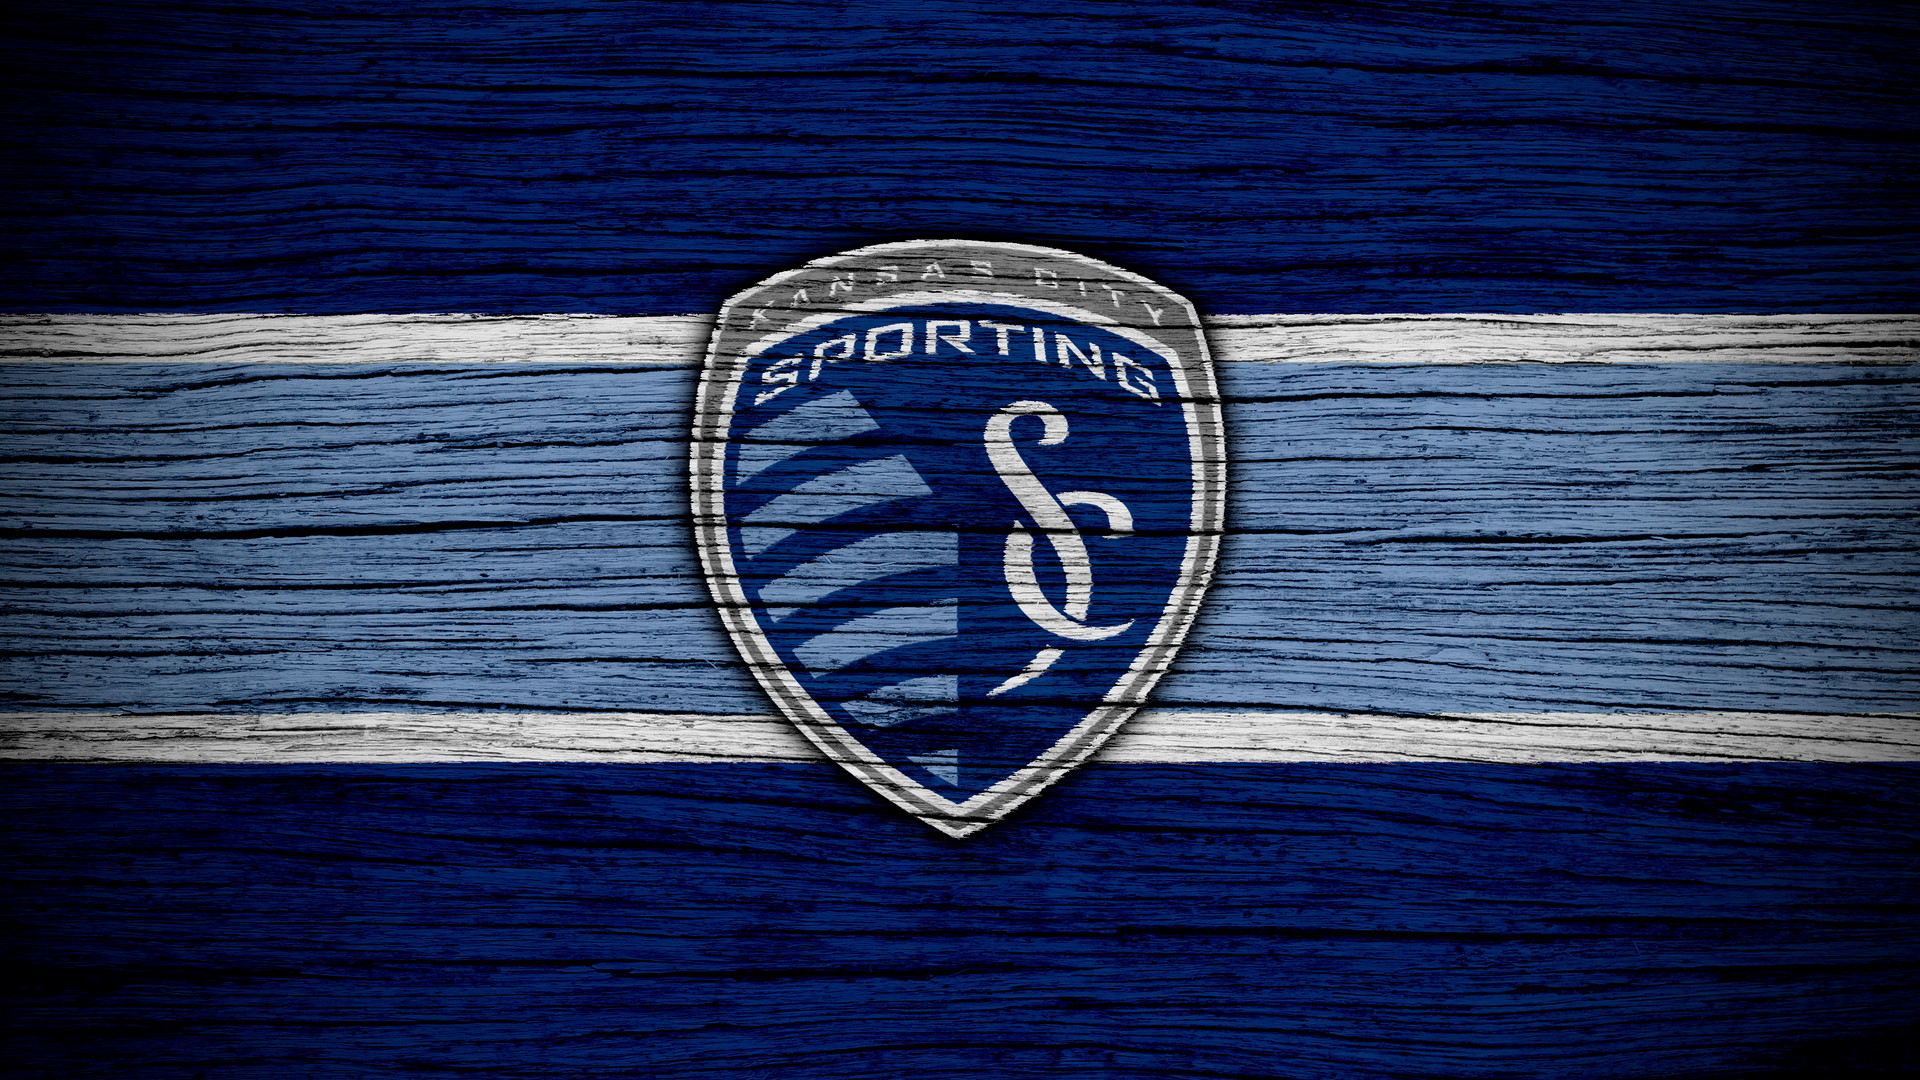 Wallpaper Desktop Sporting Kansas City HD With high-resolution 1920X1080 pixel. You can use this wallpaper for your Desktop Computers, Mac Screensavers, Windows Backgrounds, iPhone Wallpapers, Tablet or Android Lock screen and another Mobile device